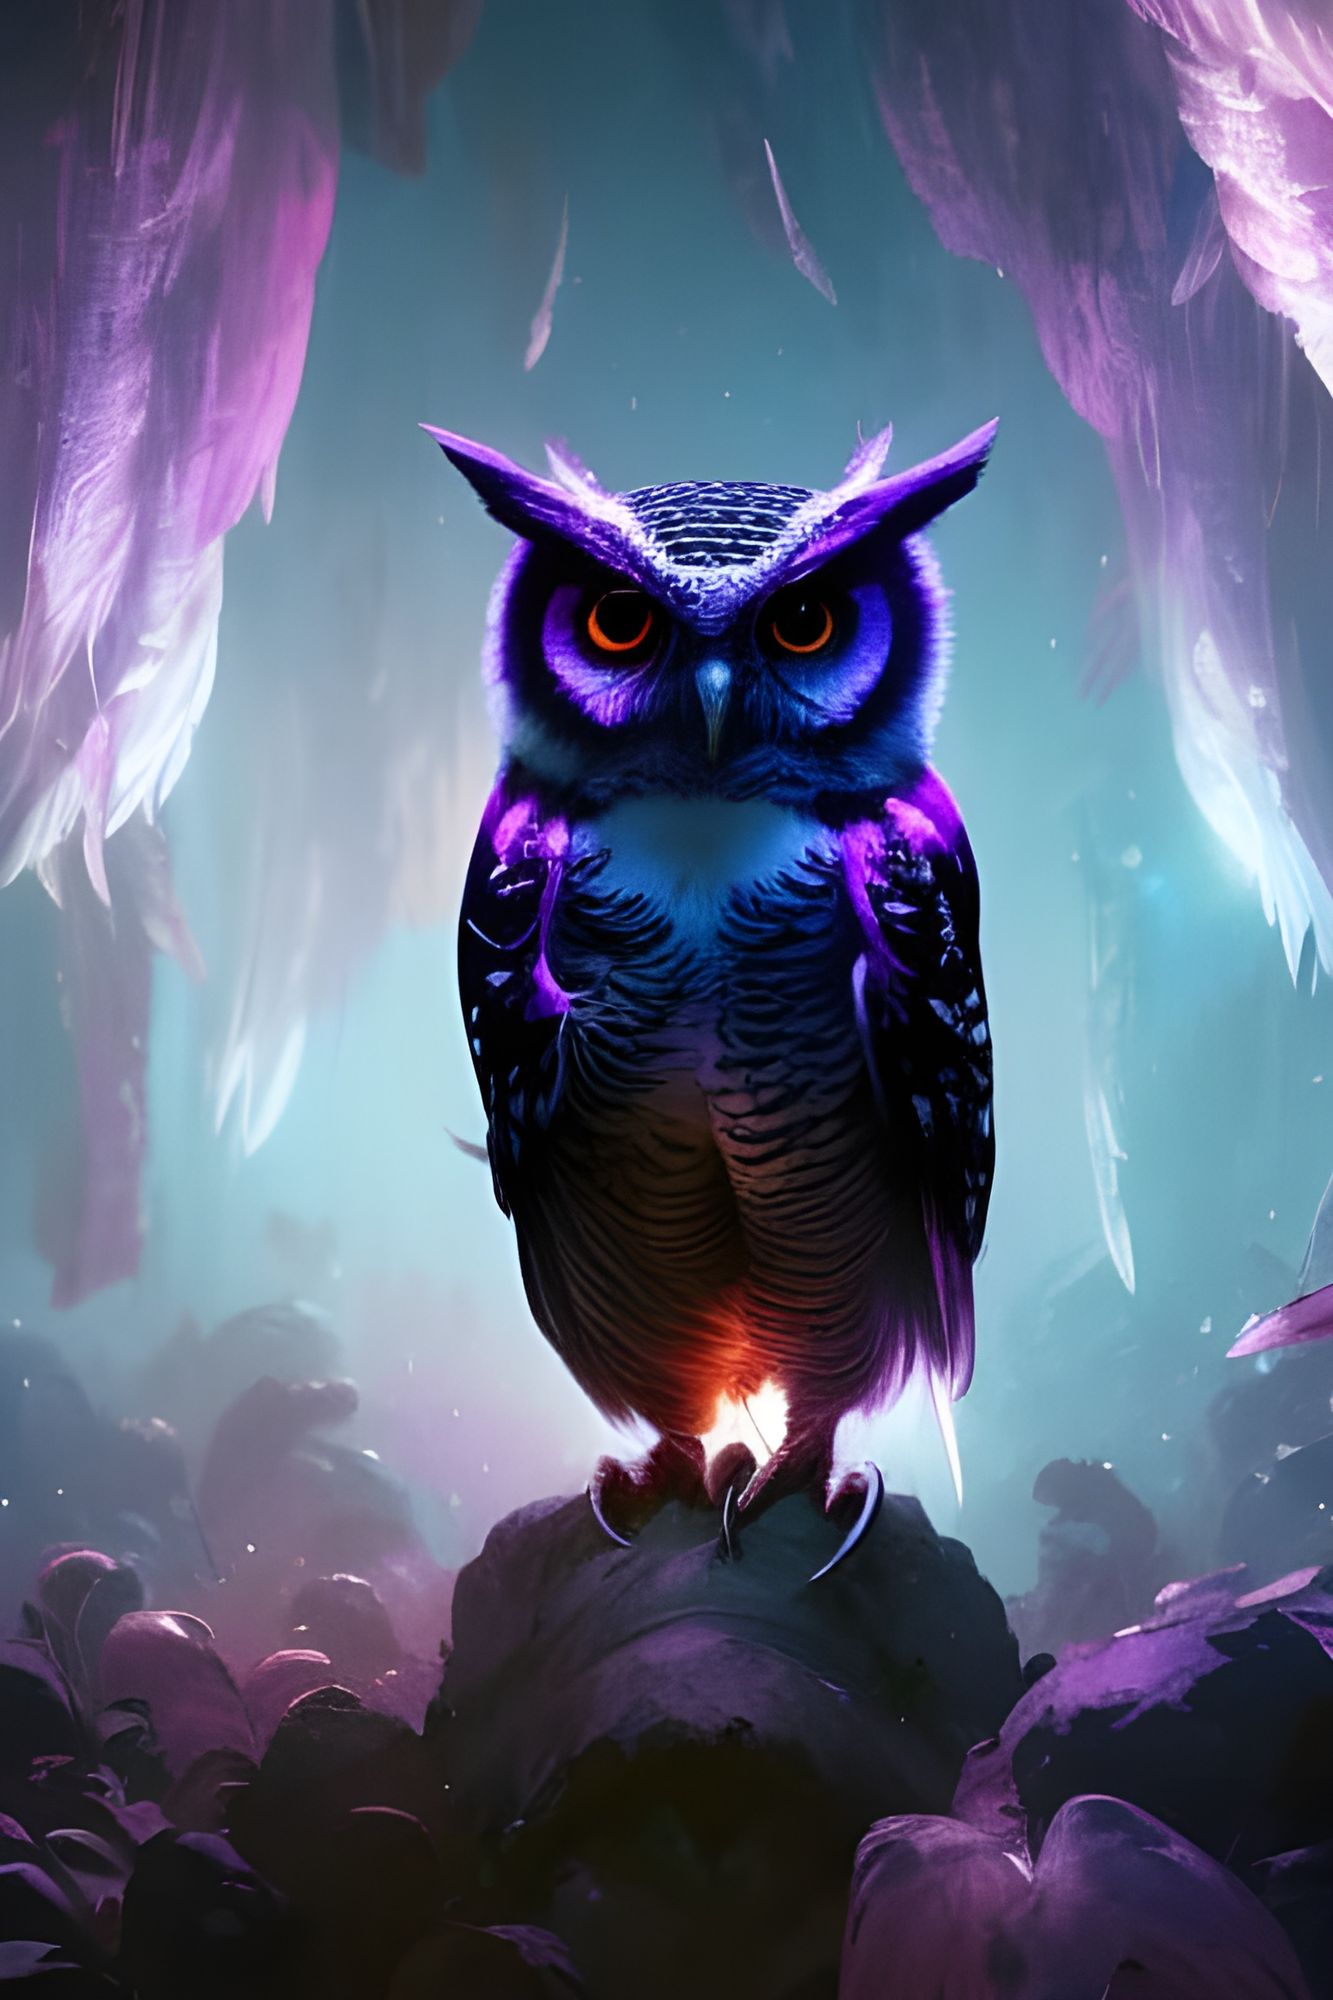 4571248 Harry Potter Apofiss night fantasy art stars animals owl  Hedwig Harry Potter and the Deathly Hallows  Rare Gallery HD Wallpapers